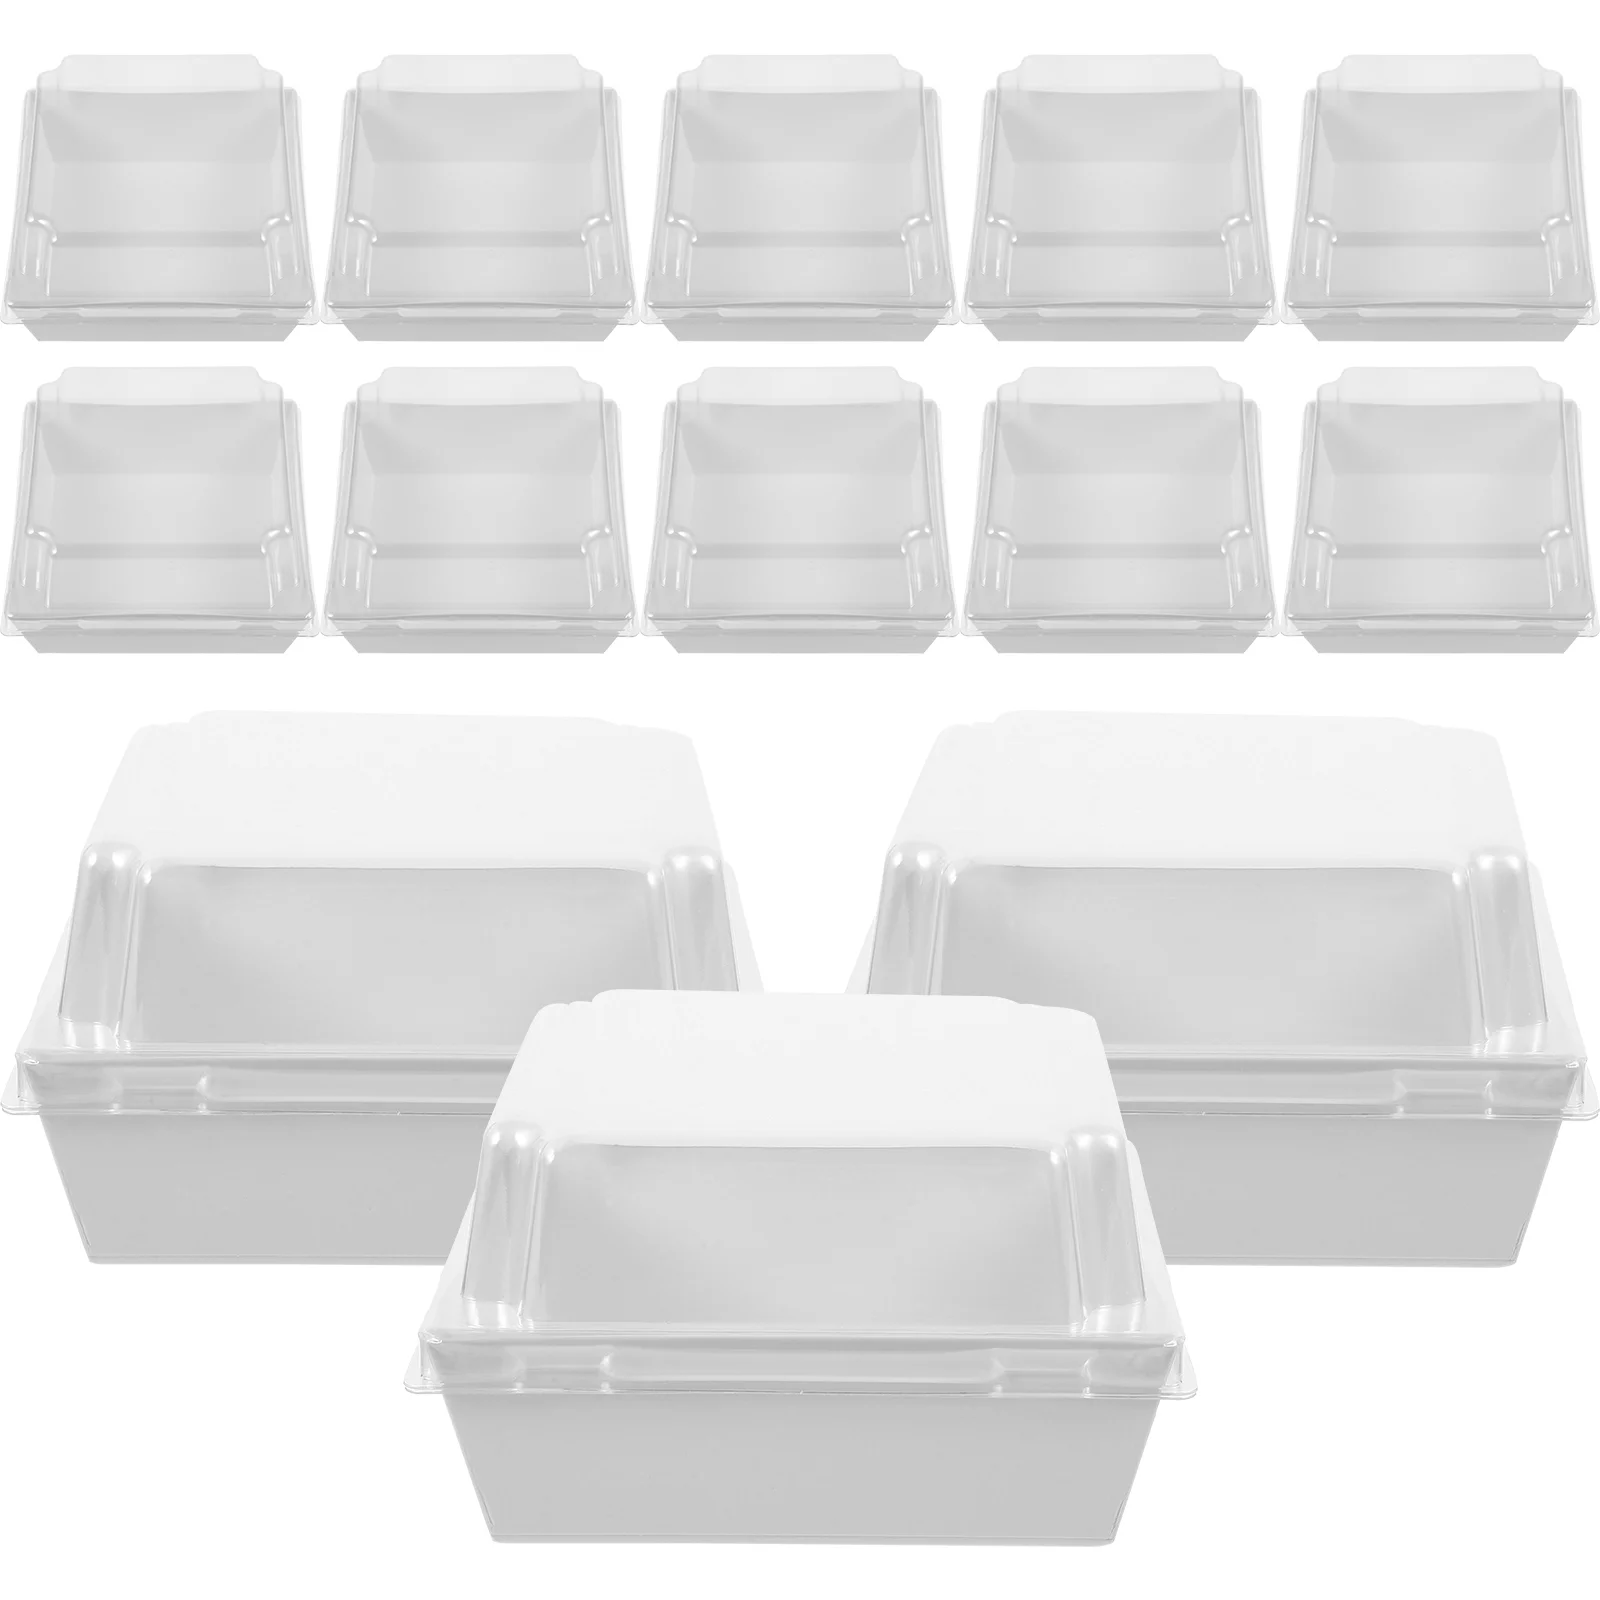 

50 Pcs Biscuit Party Accessory Cake Container Pie Slice Containers for Food Cookie Sandwich Dessert Box